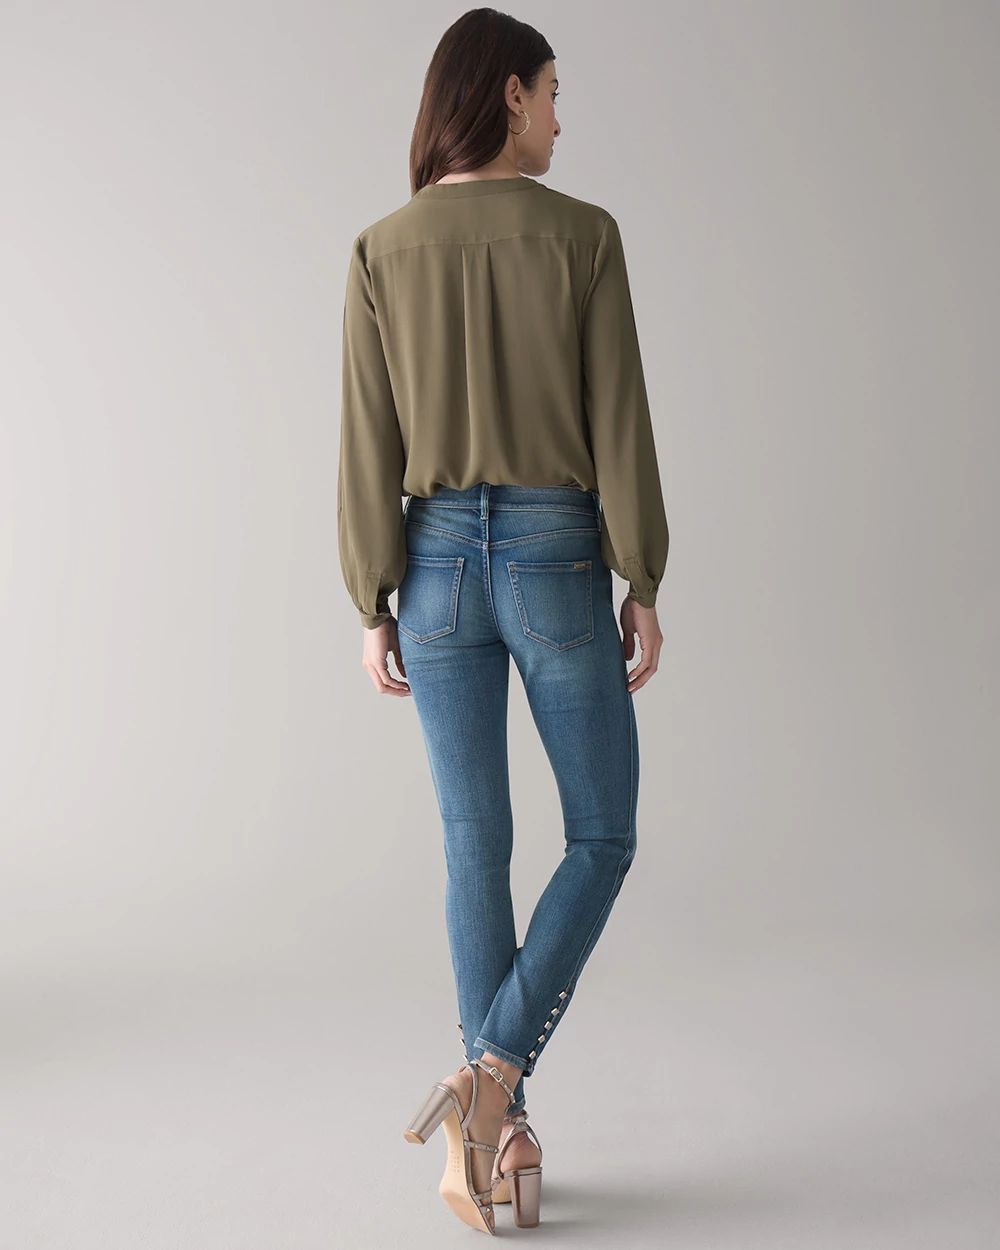 Mid-Rise Everyday Soft Denim™ Button Ankle Skinny Jeans click to view larger image.